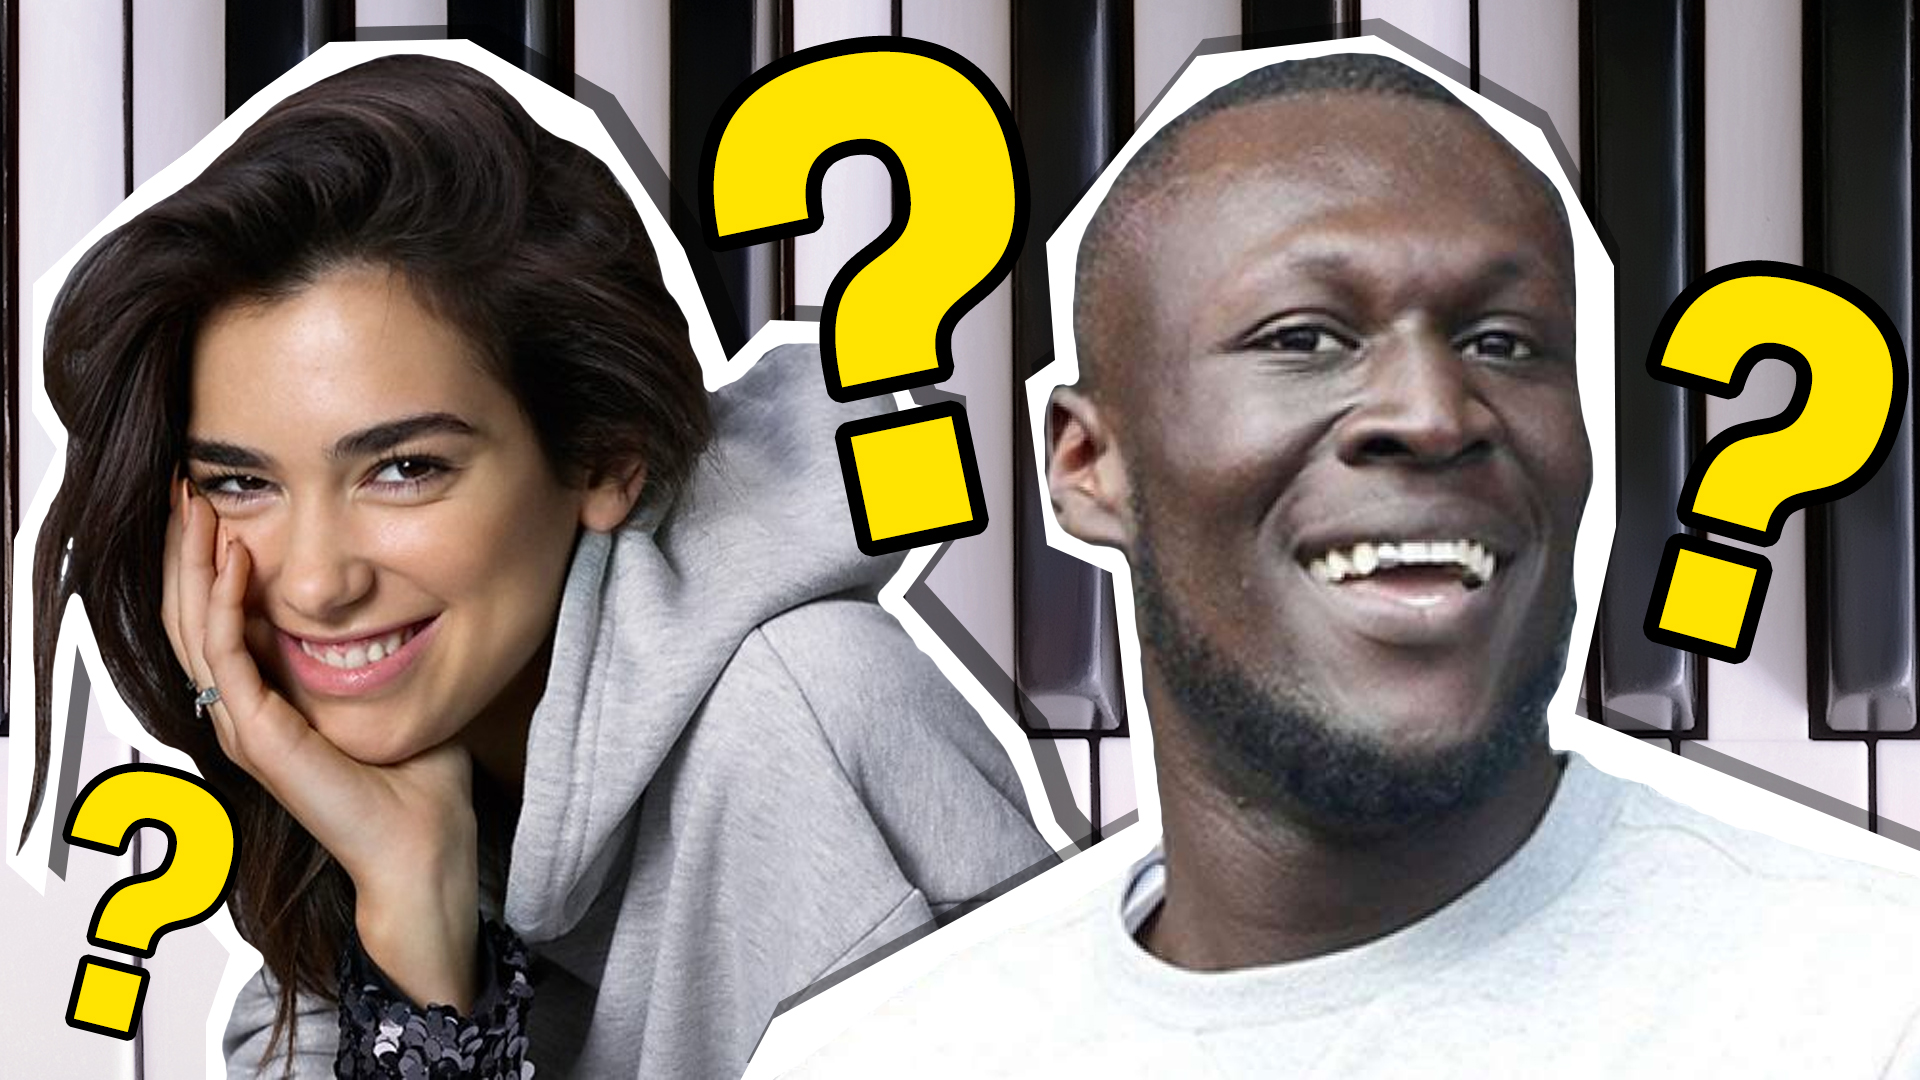 dua lipa and stormzy chilling with some question marks